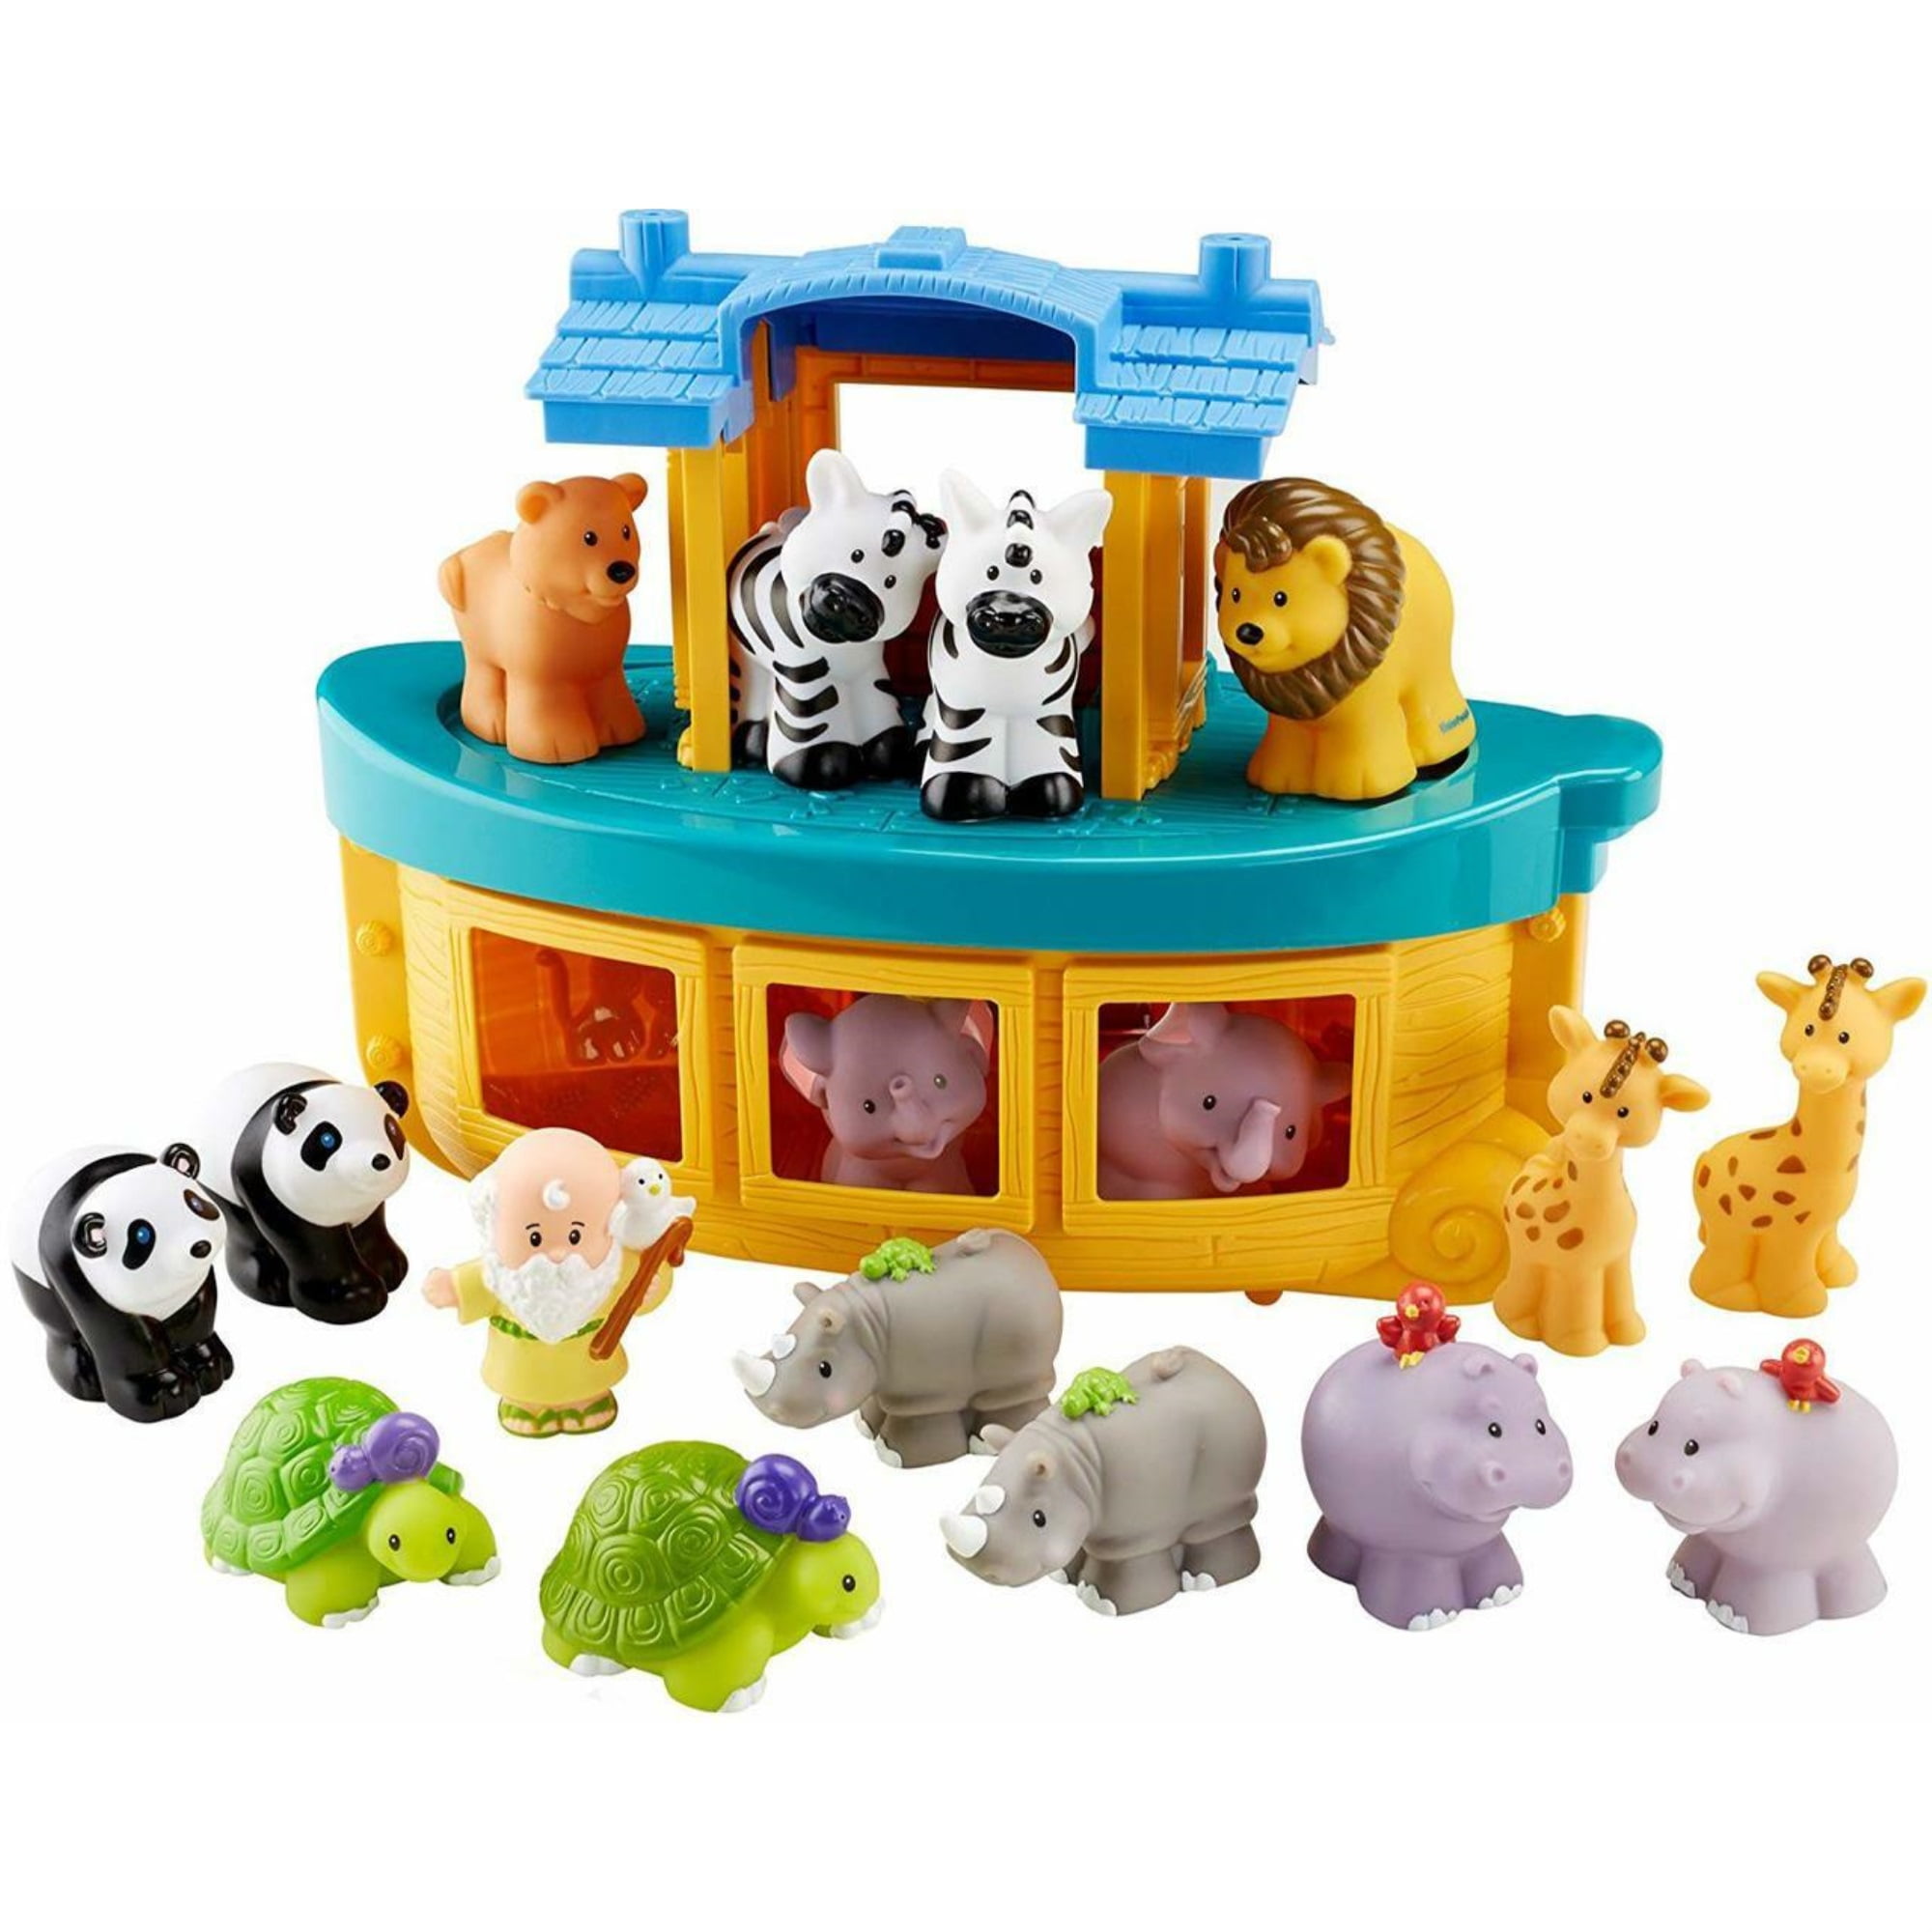 Little People Fisher-Price Noah's Ark with Animals Action Figure Set, 18 Pieces